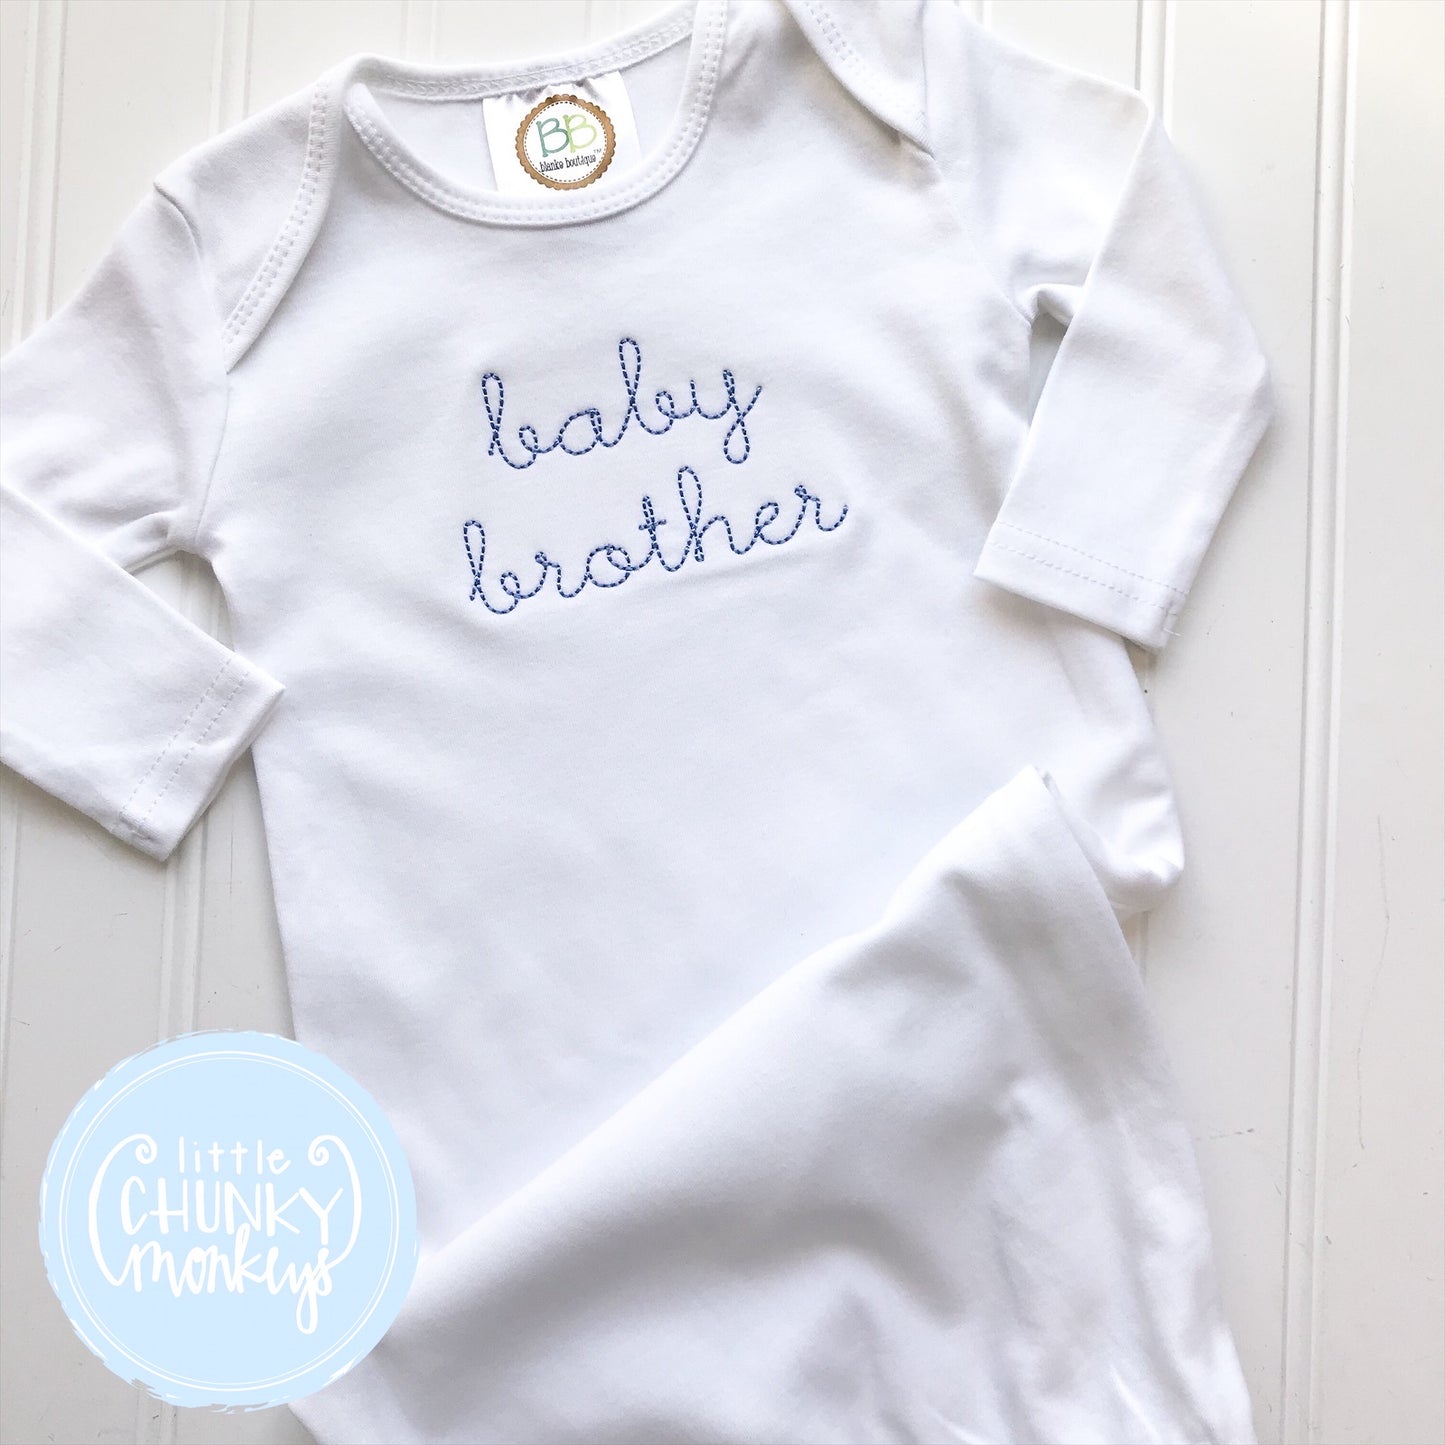 Baby Boy Gown - Bring Home Outfit - Personalized Newborn Gown White with Simple Stitch